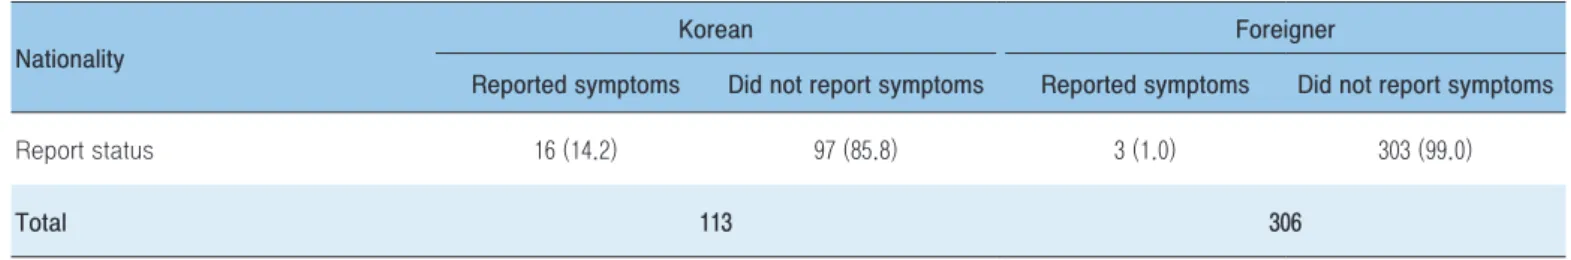 Table 1. Health Declaration Forms (HDFs) Report Status by Nationality